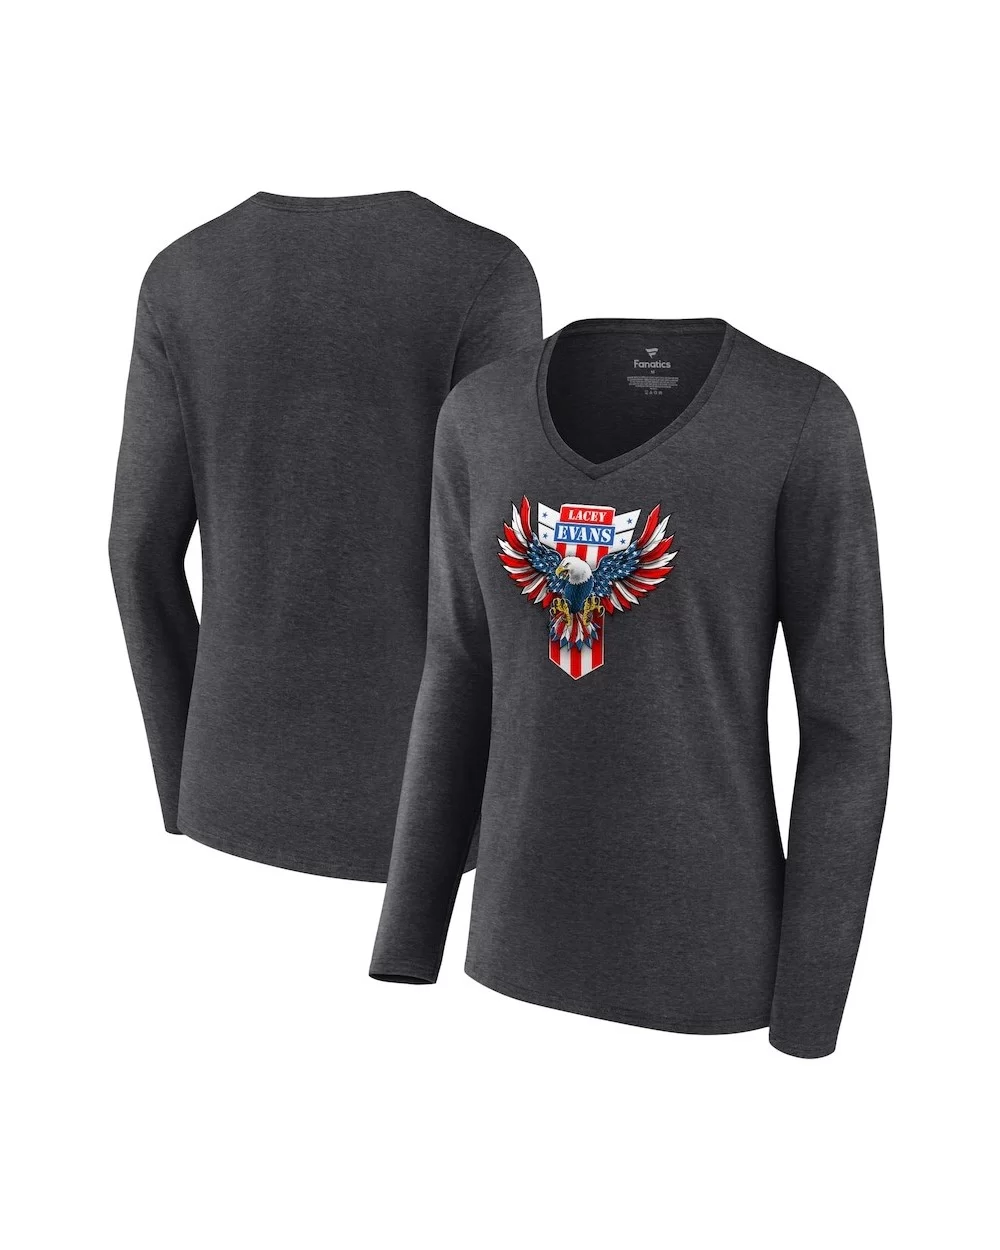 Women's Fanatics Branded Charcoal Lacey Evans Eagle V-Neck Long Sleeve T-Shirt $9.24 T-Shirts